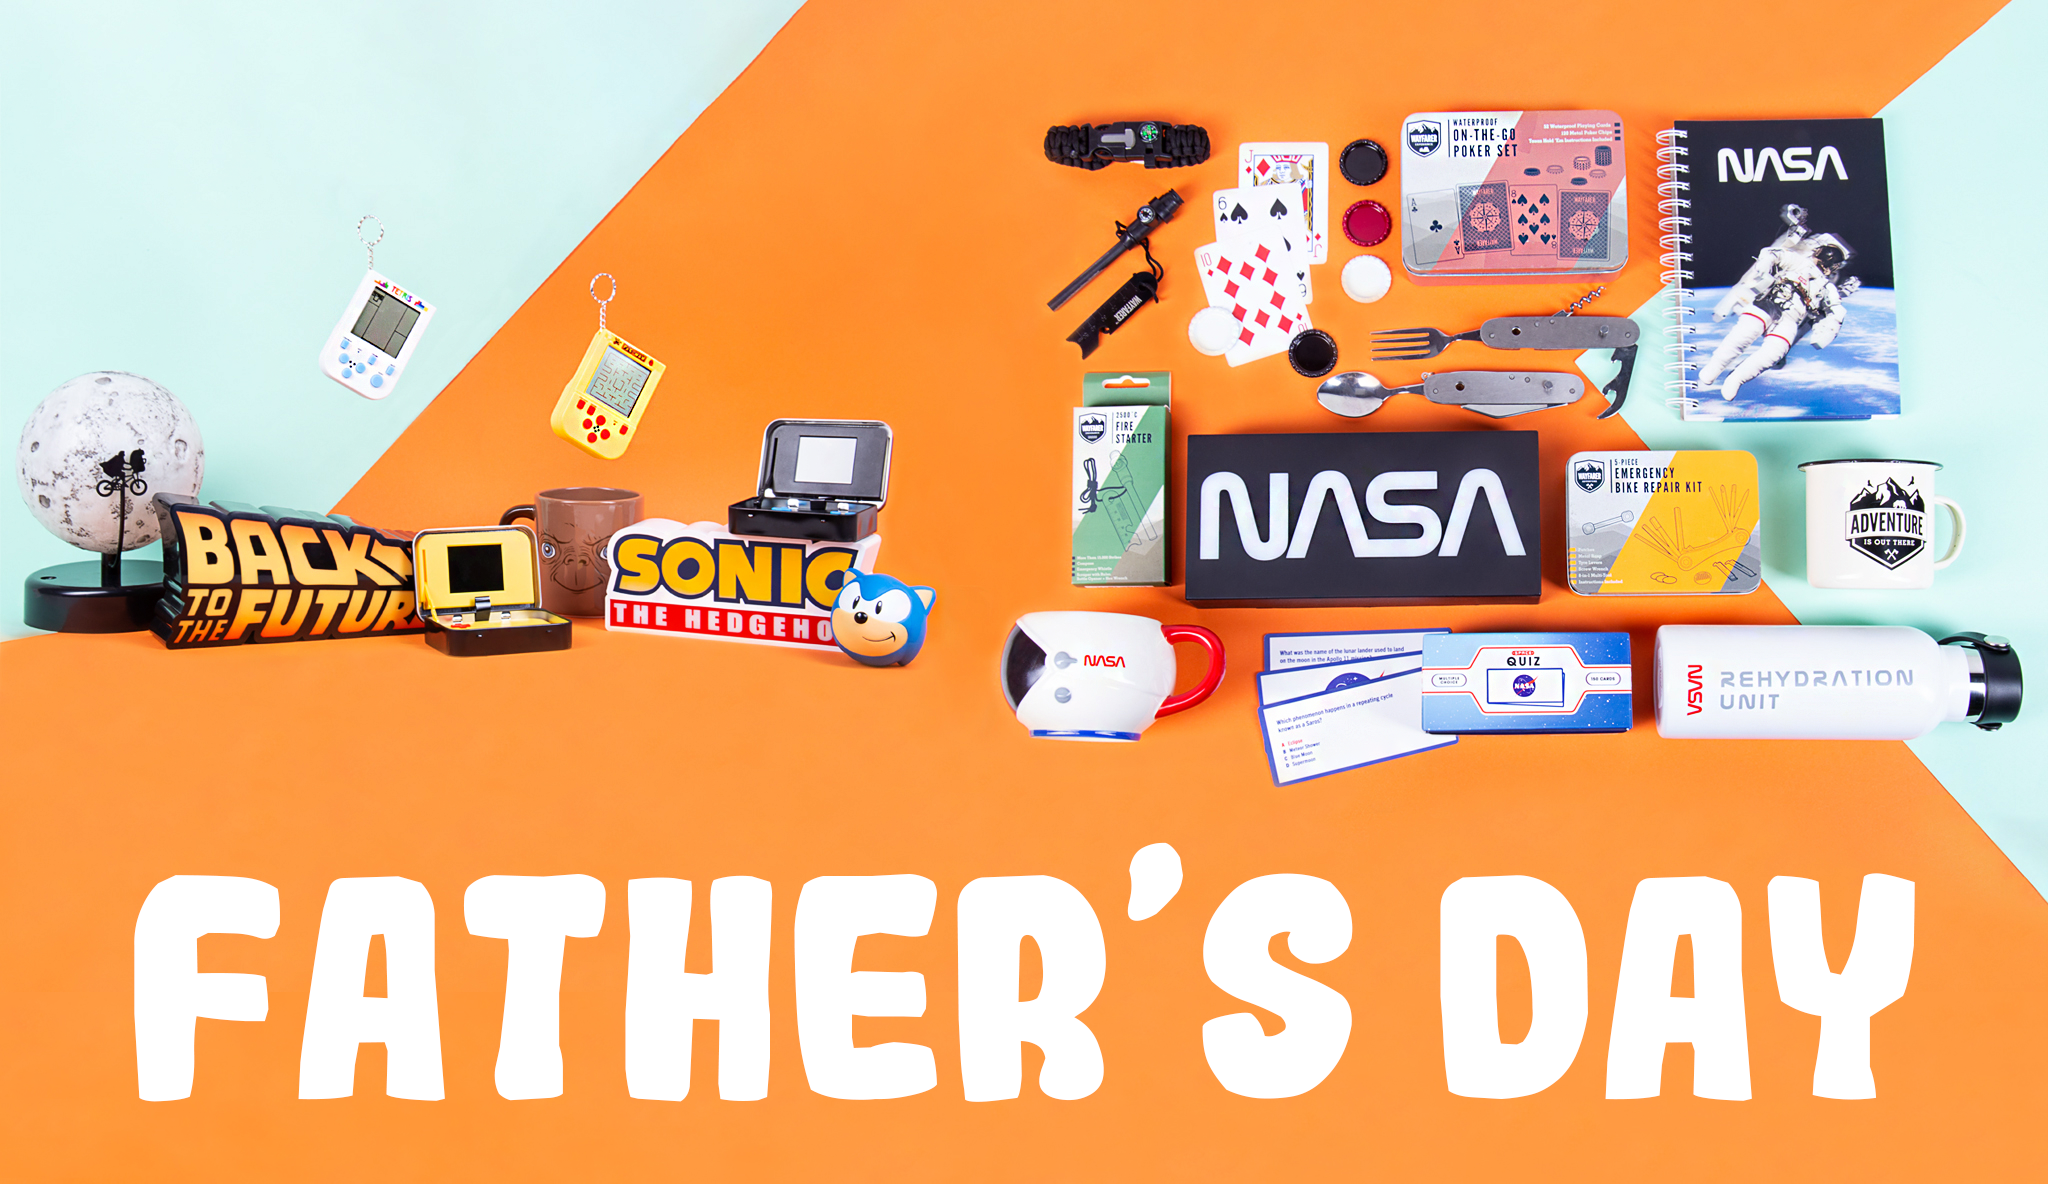 Father's Day Banner